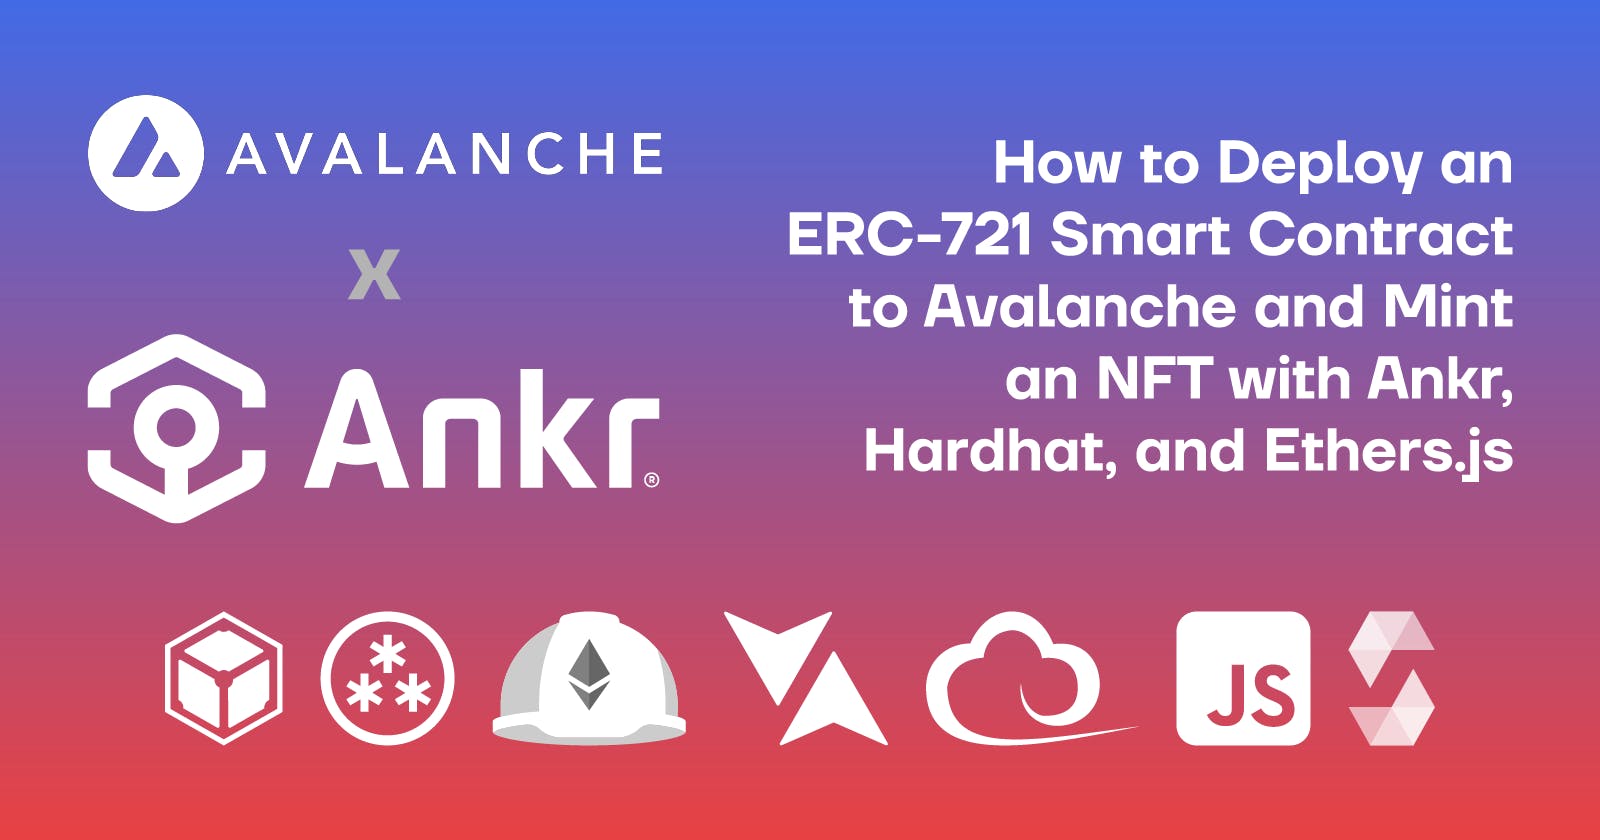 How to Deploy an ERC-721 Smart Contract to Avalanche and Mint an NFT with Ankr, Hardhat, and Ethers.js 🔺